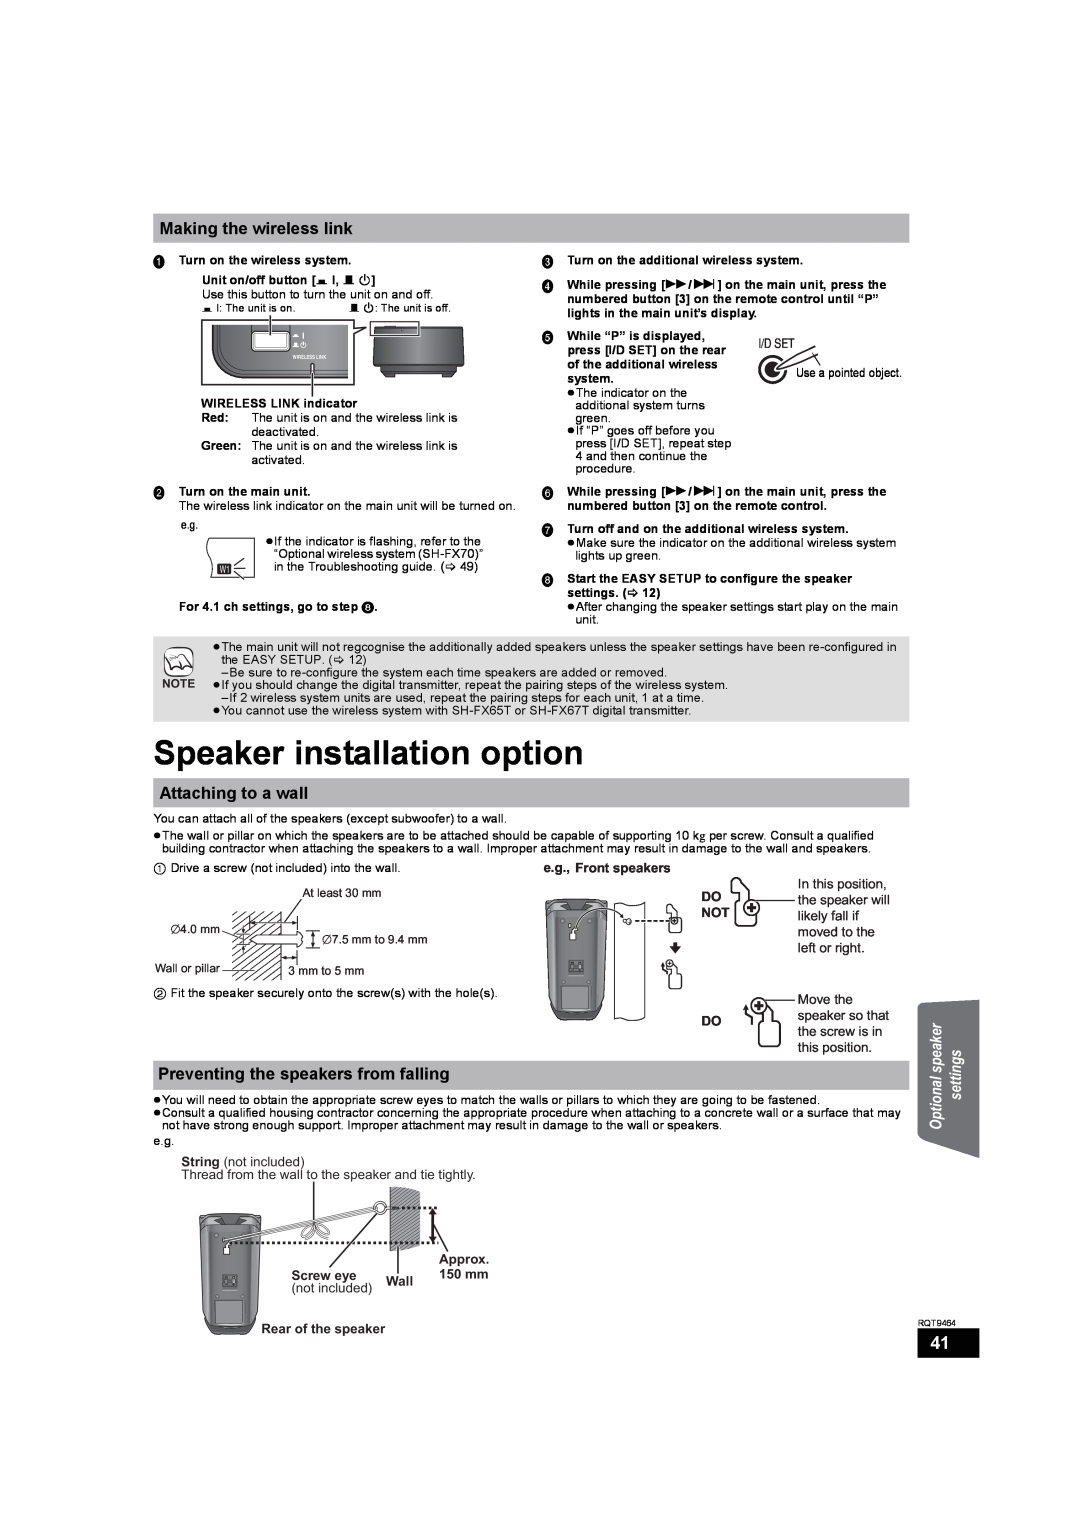 Panasonic SC-BTX70 manual Speaker installation option, Making the wireless link, Attaching to a wall 